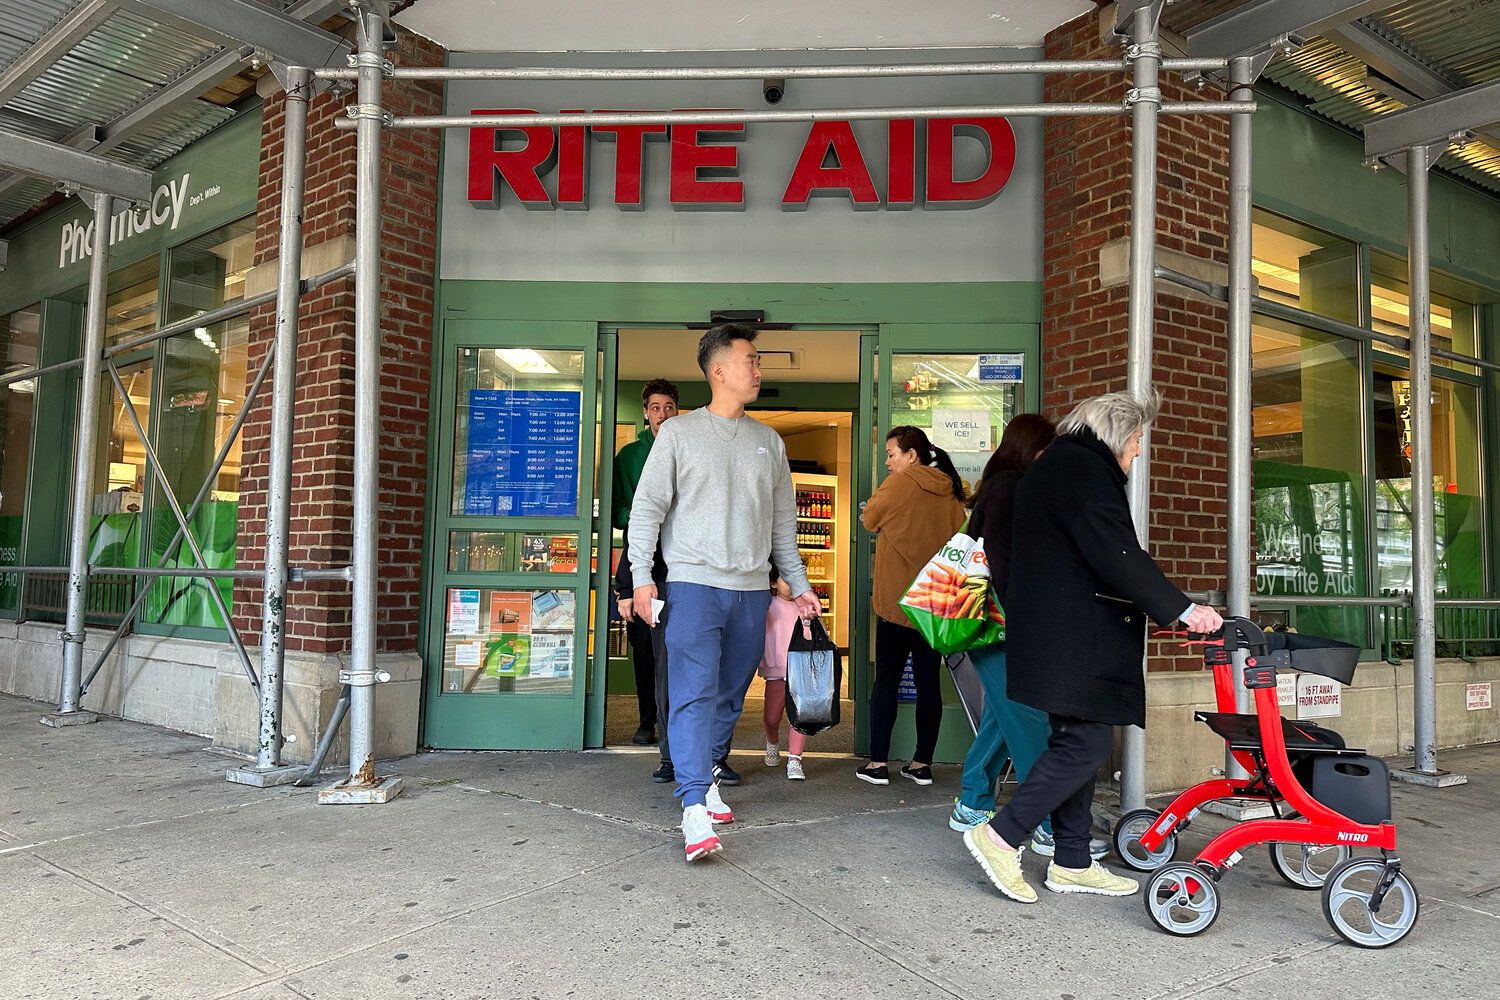 The Rite Aid drugstore on Hudson Street in Manhattan earlier this month.